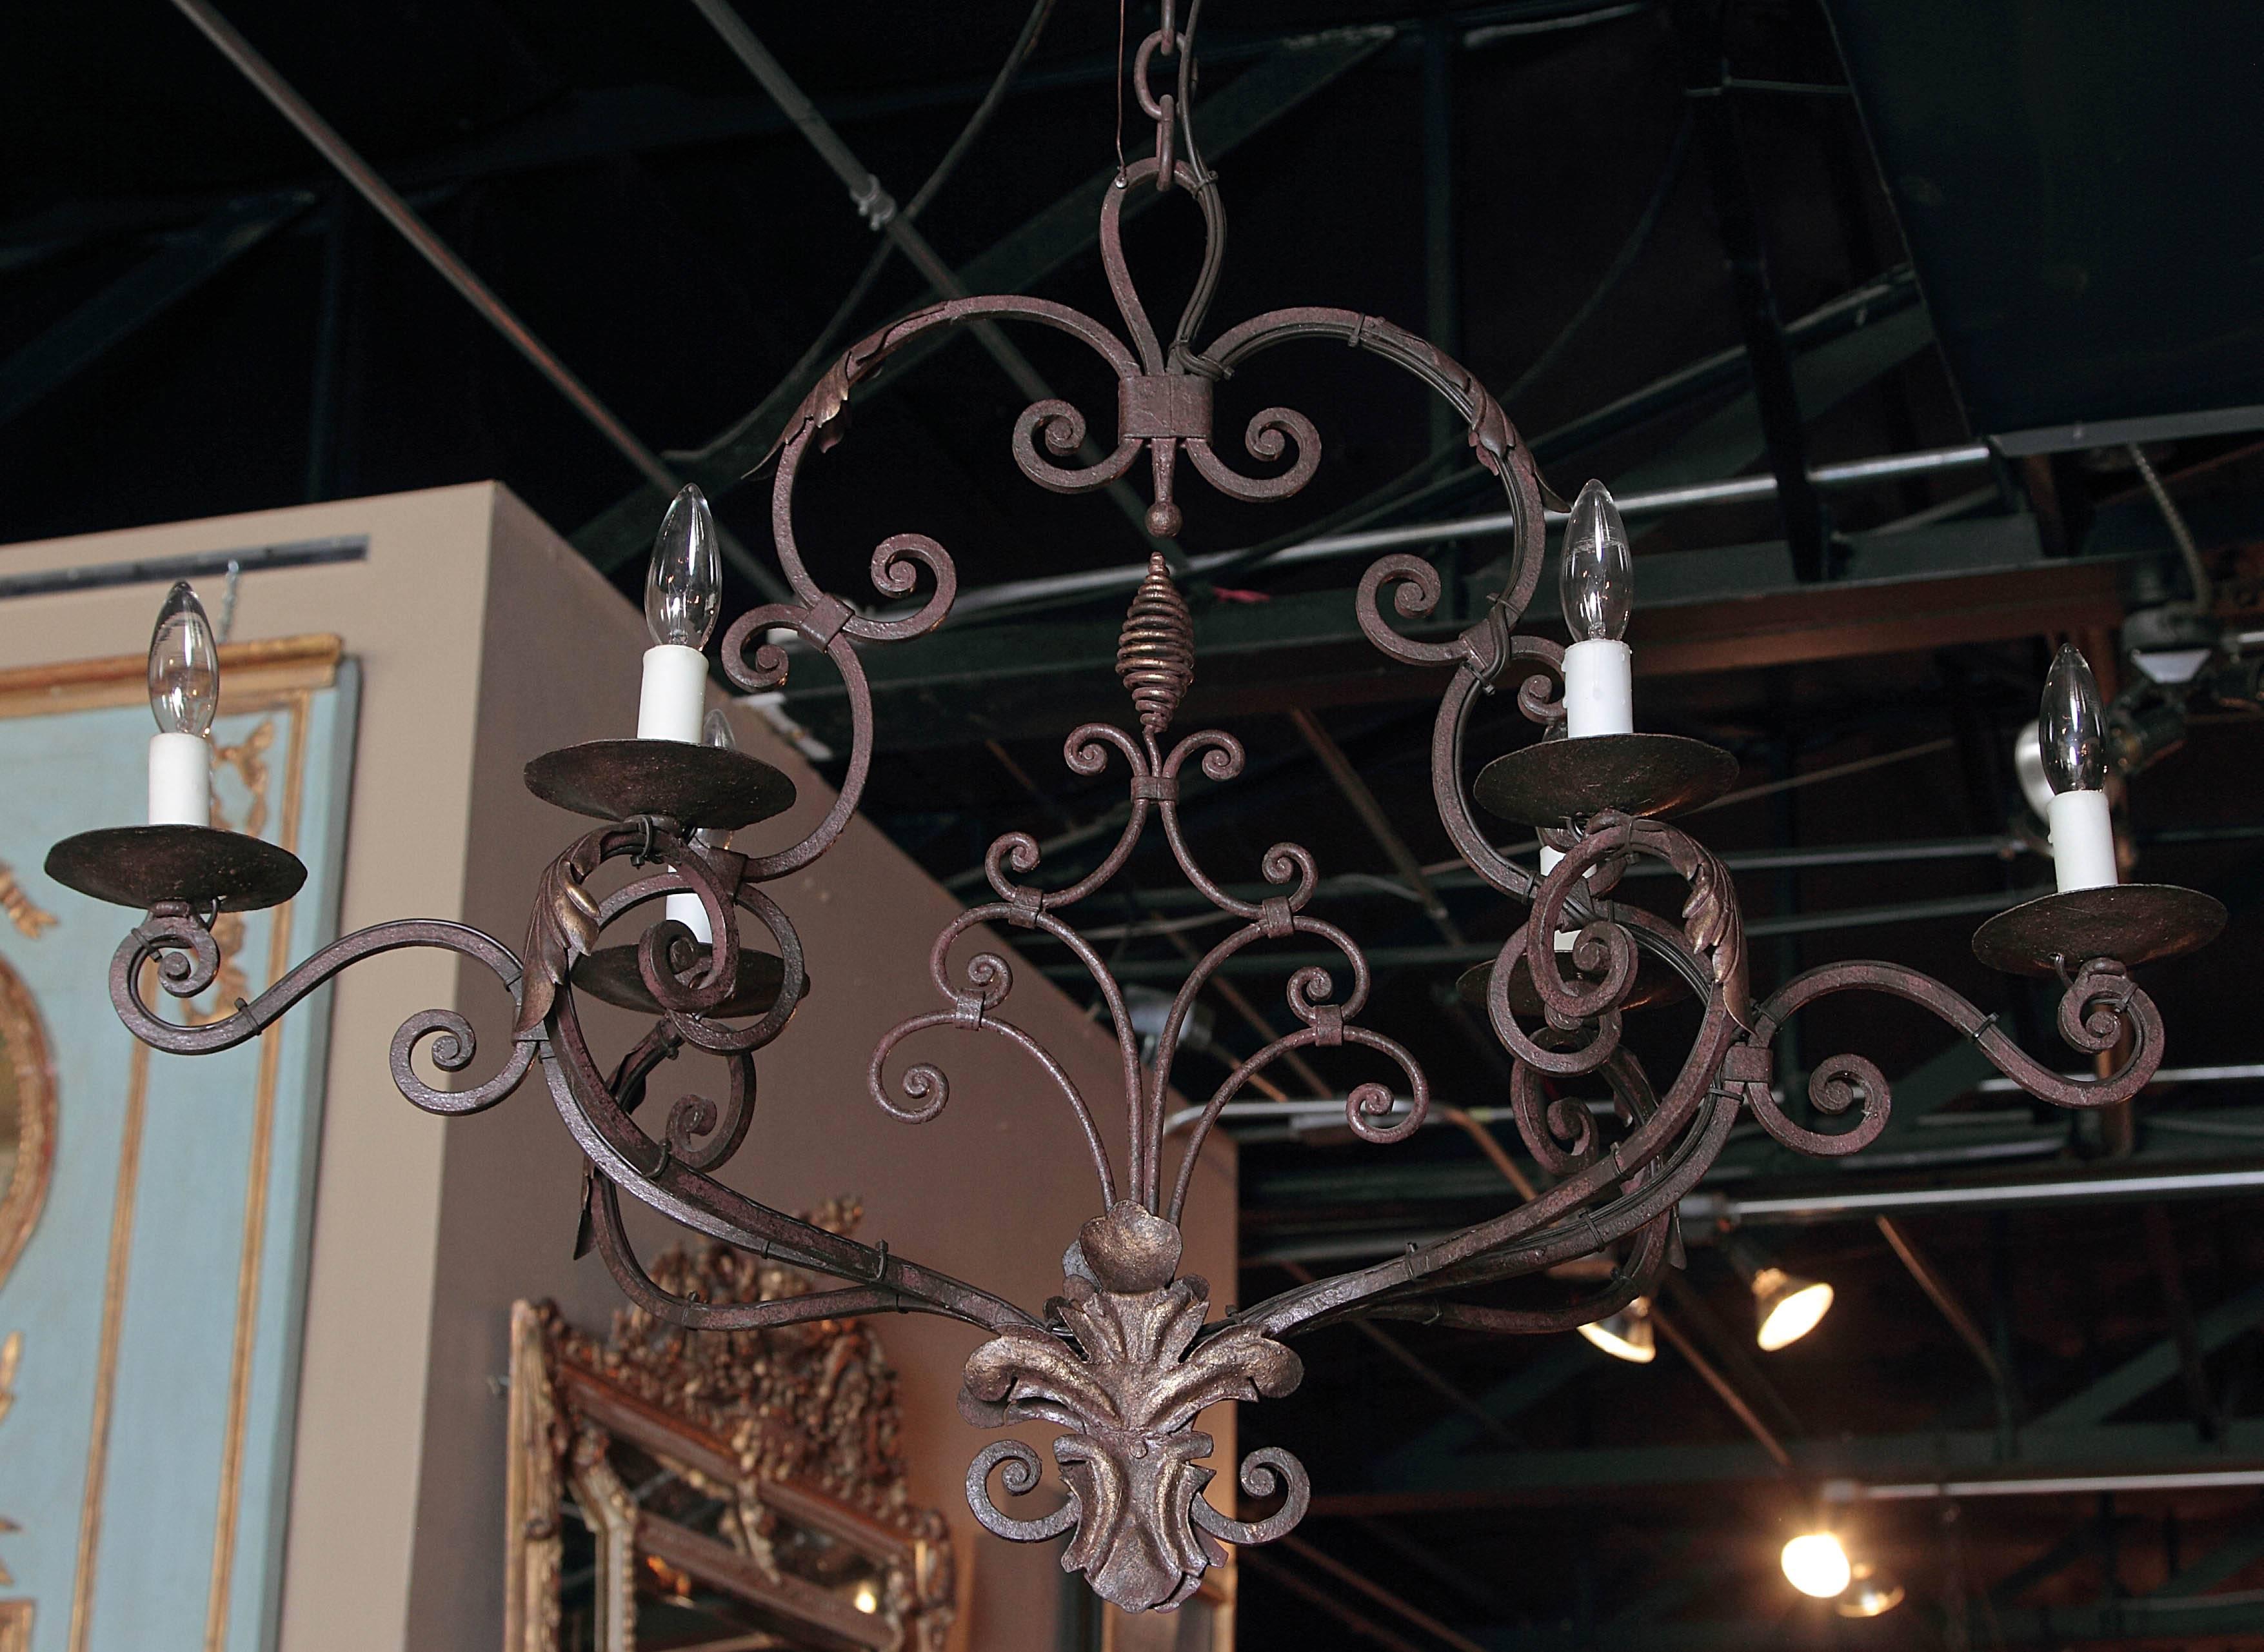 This elegant, scrolling, oblong chandelier would make a lovely addition to a home of any style. Crafted in France circa 1900, the iron light fixture features six scrolled arms newly wired, and curling center finial at the base embellished by back to